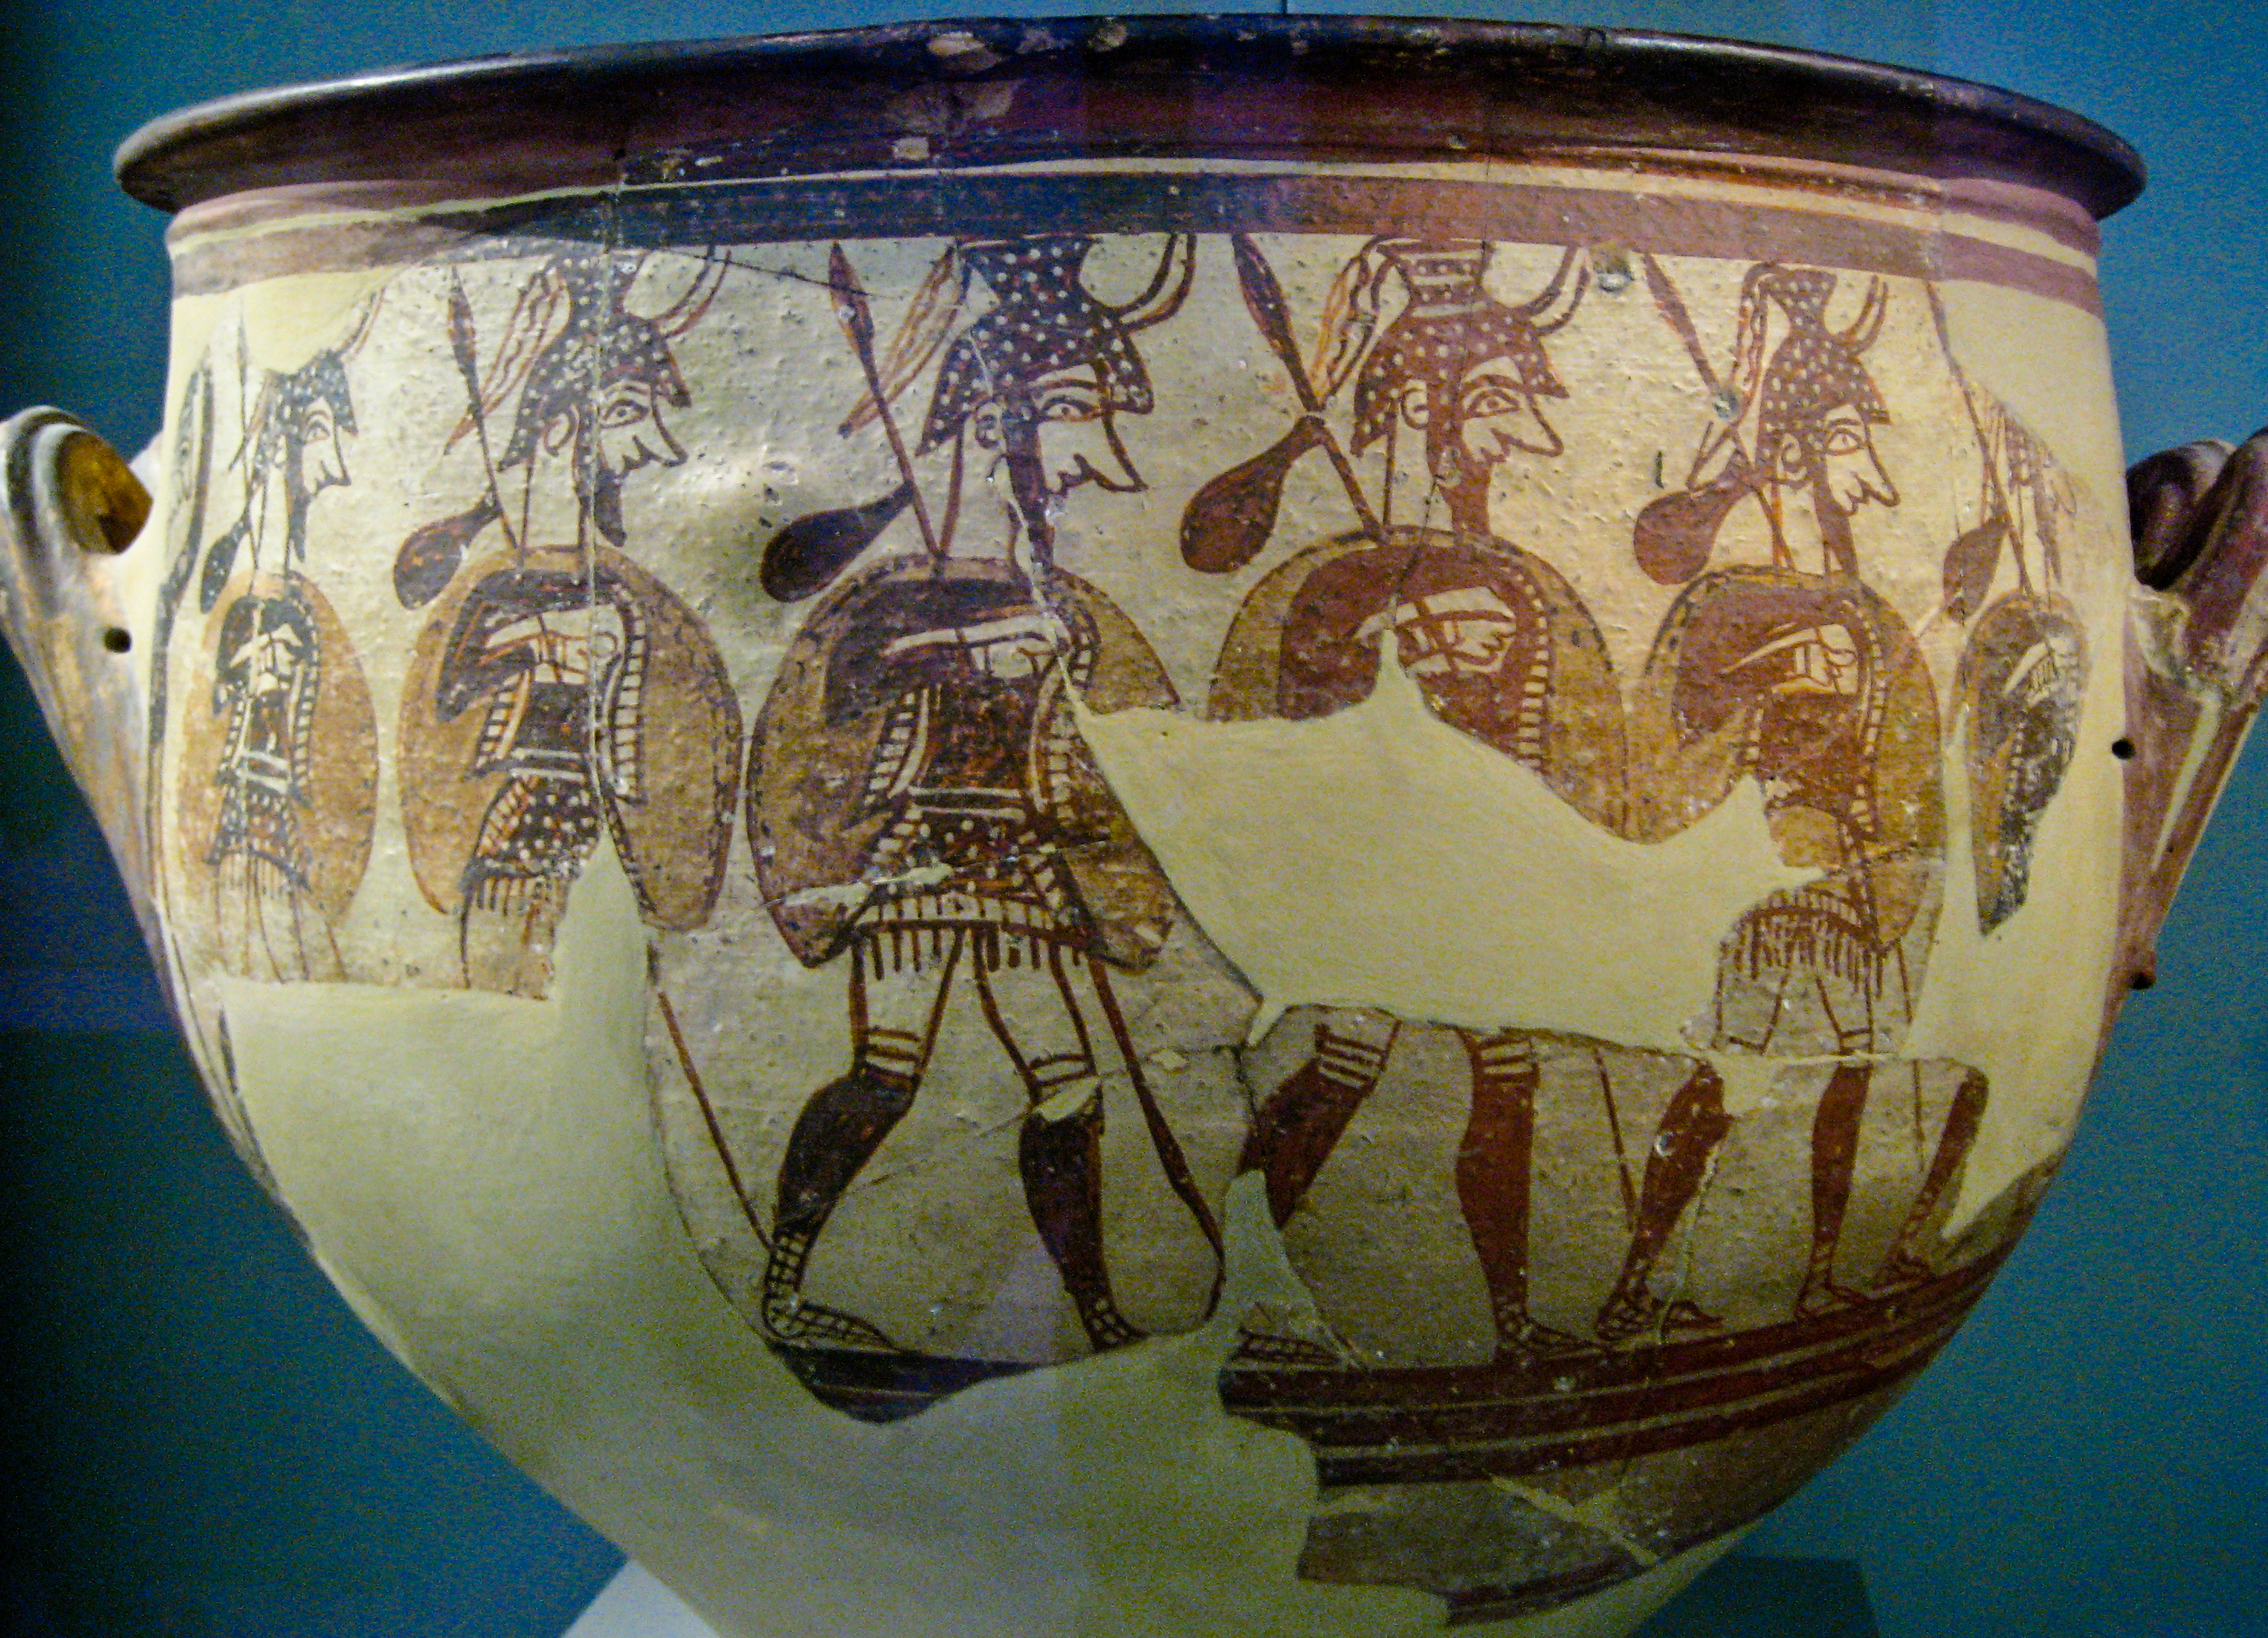 Large_Krater_with_Armored_Men_Departing_for_Battle_Mycenae_acropolis_12th_century_BC_3402016857.jpg